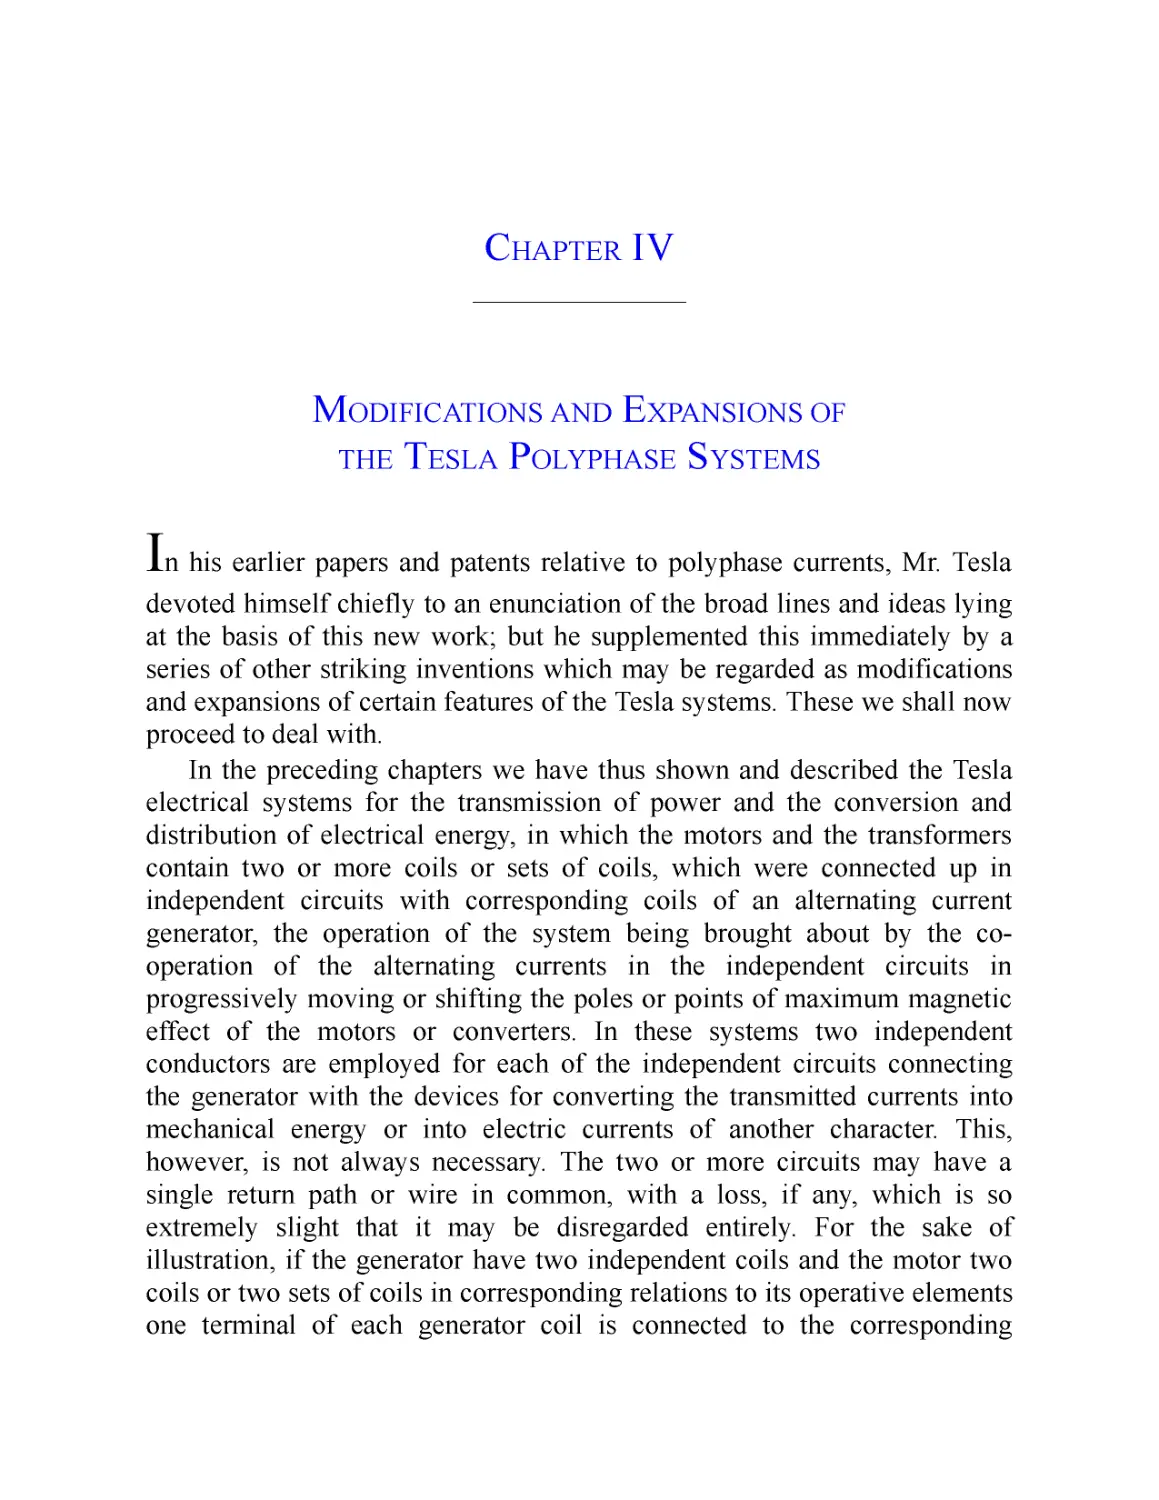 ﻿Chapter IV: Modifications and Expansions of the Tesla Polyphase System